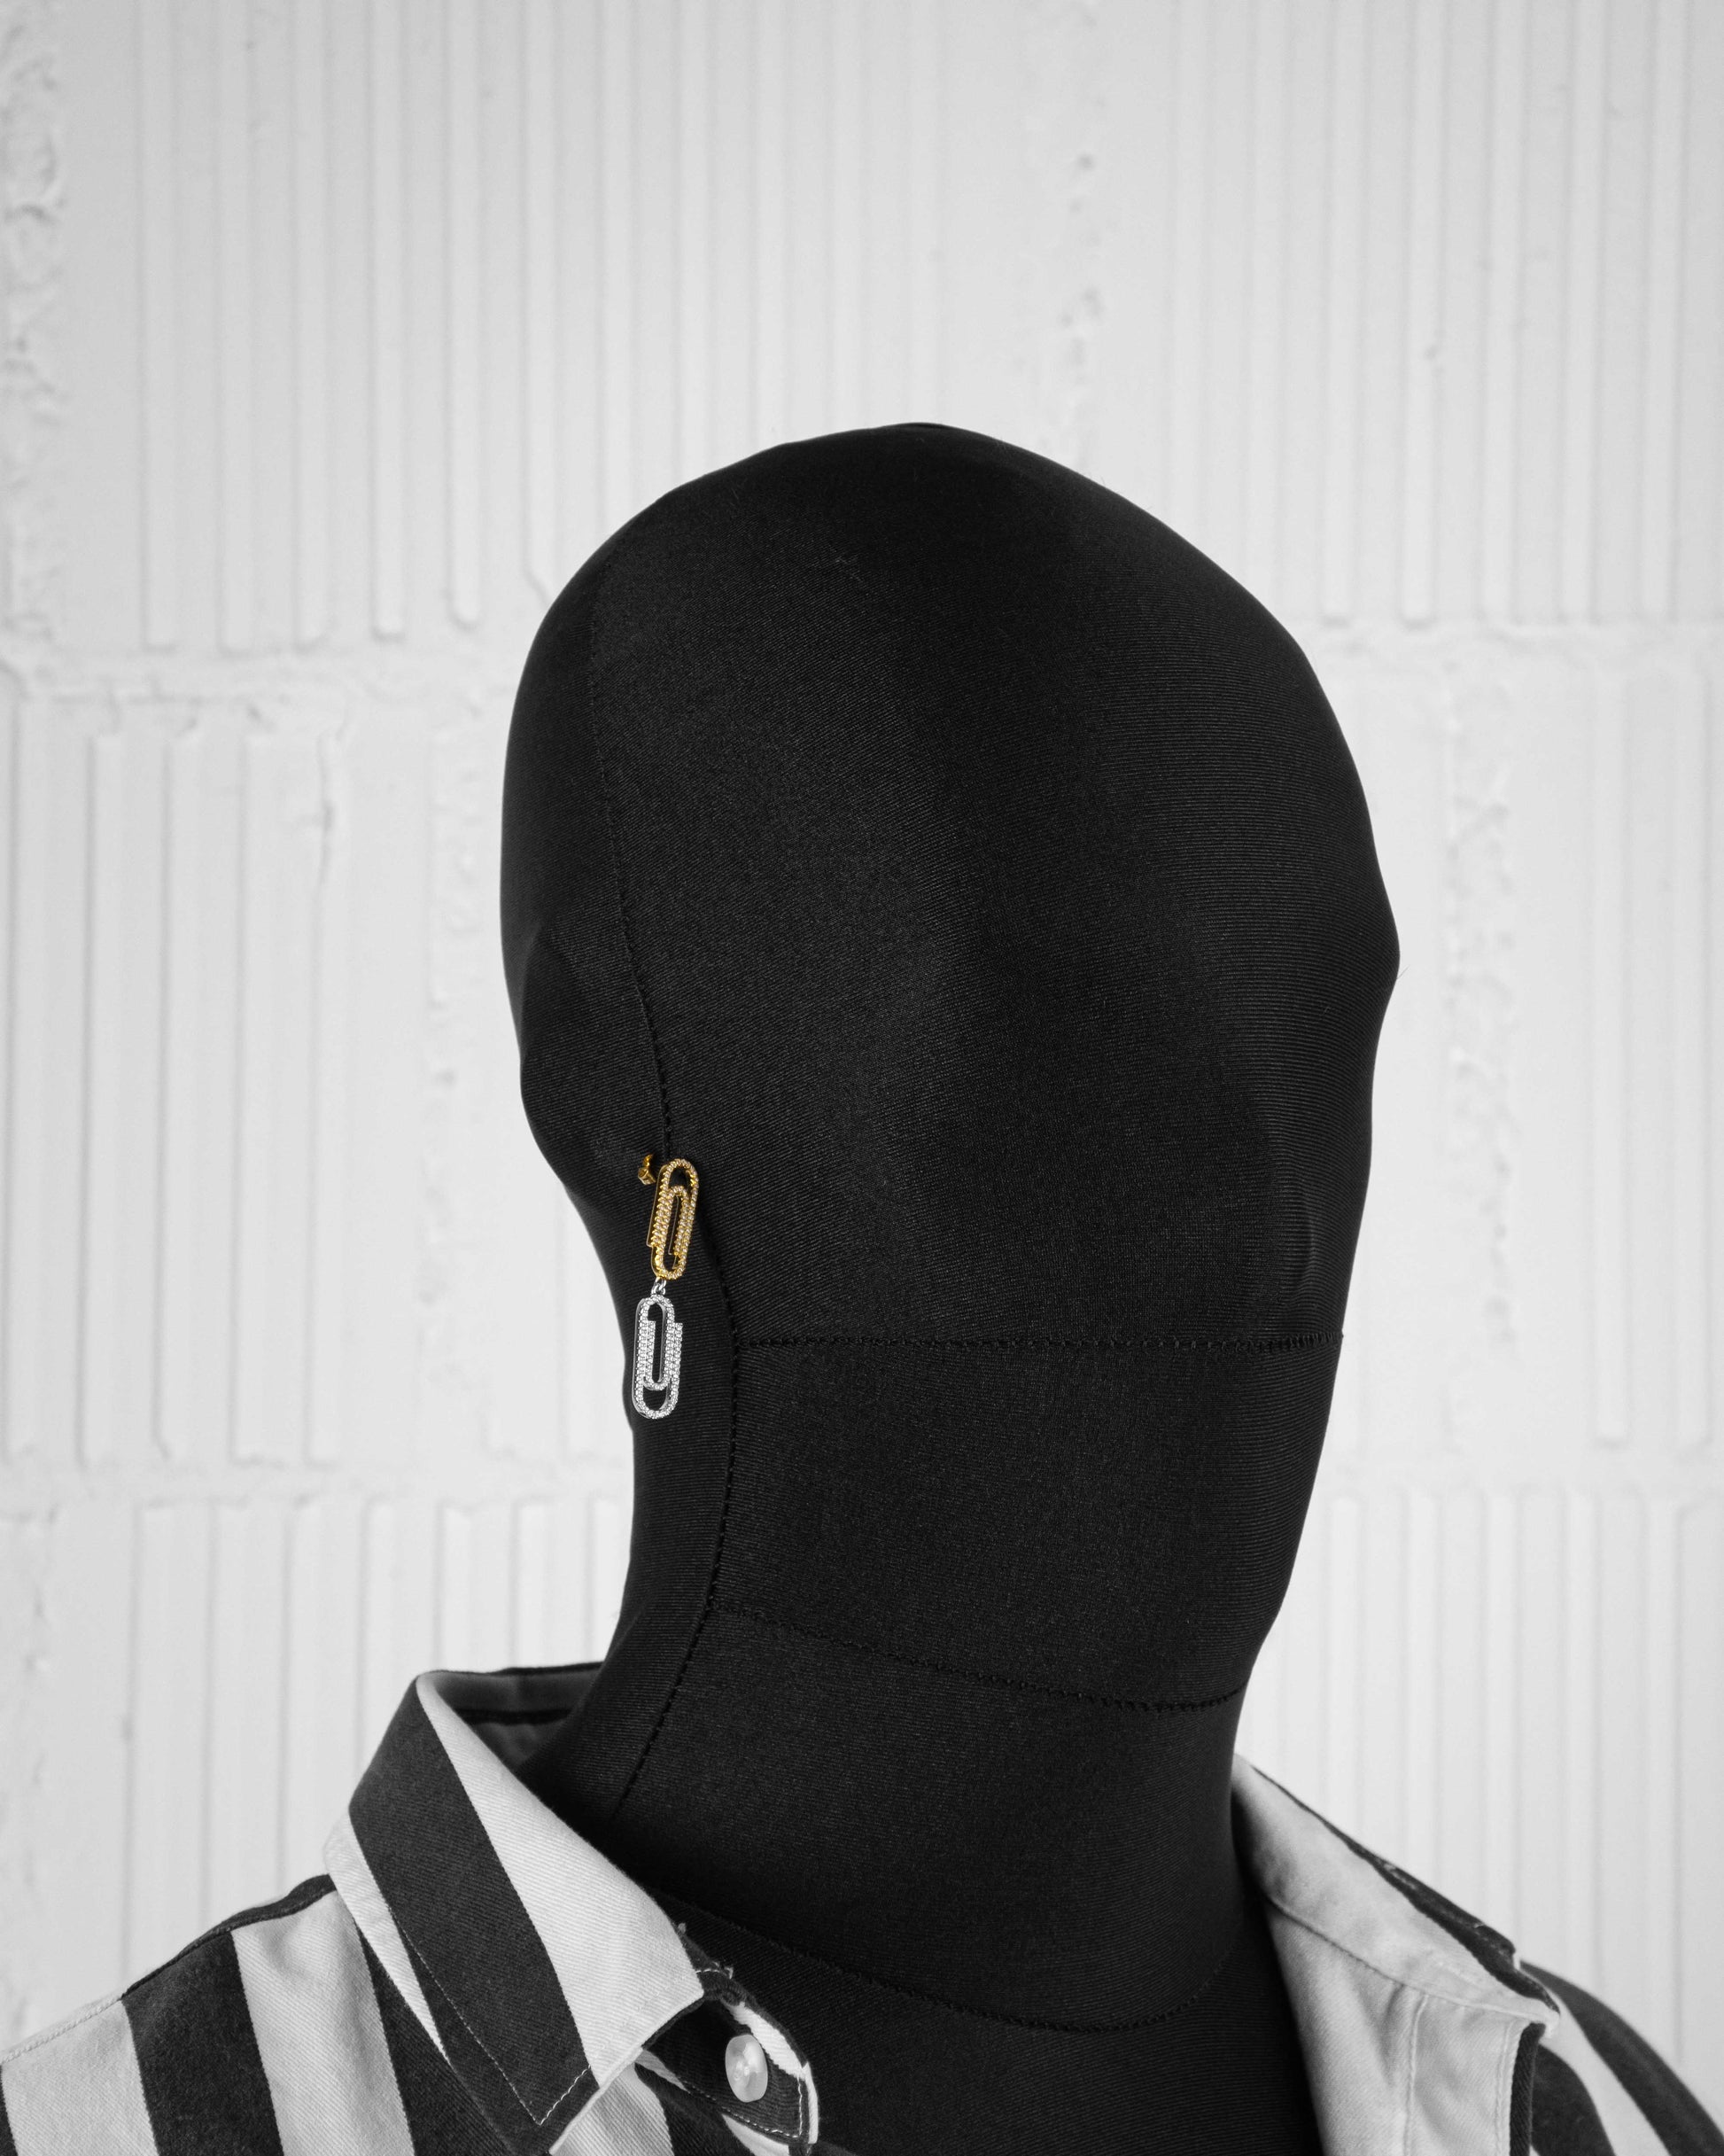 man with black suit wearing 18k yellow and white gold coated paperclip earrings with hand-set micropavé stones in white on constrasting asymmetrcial links